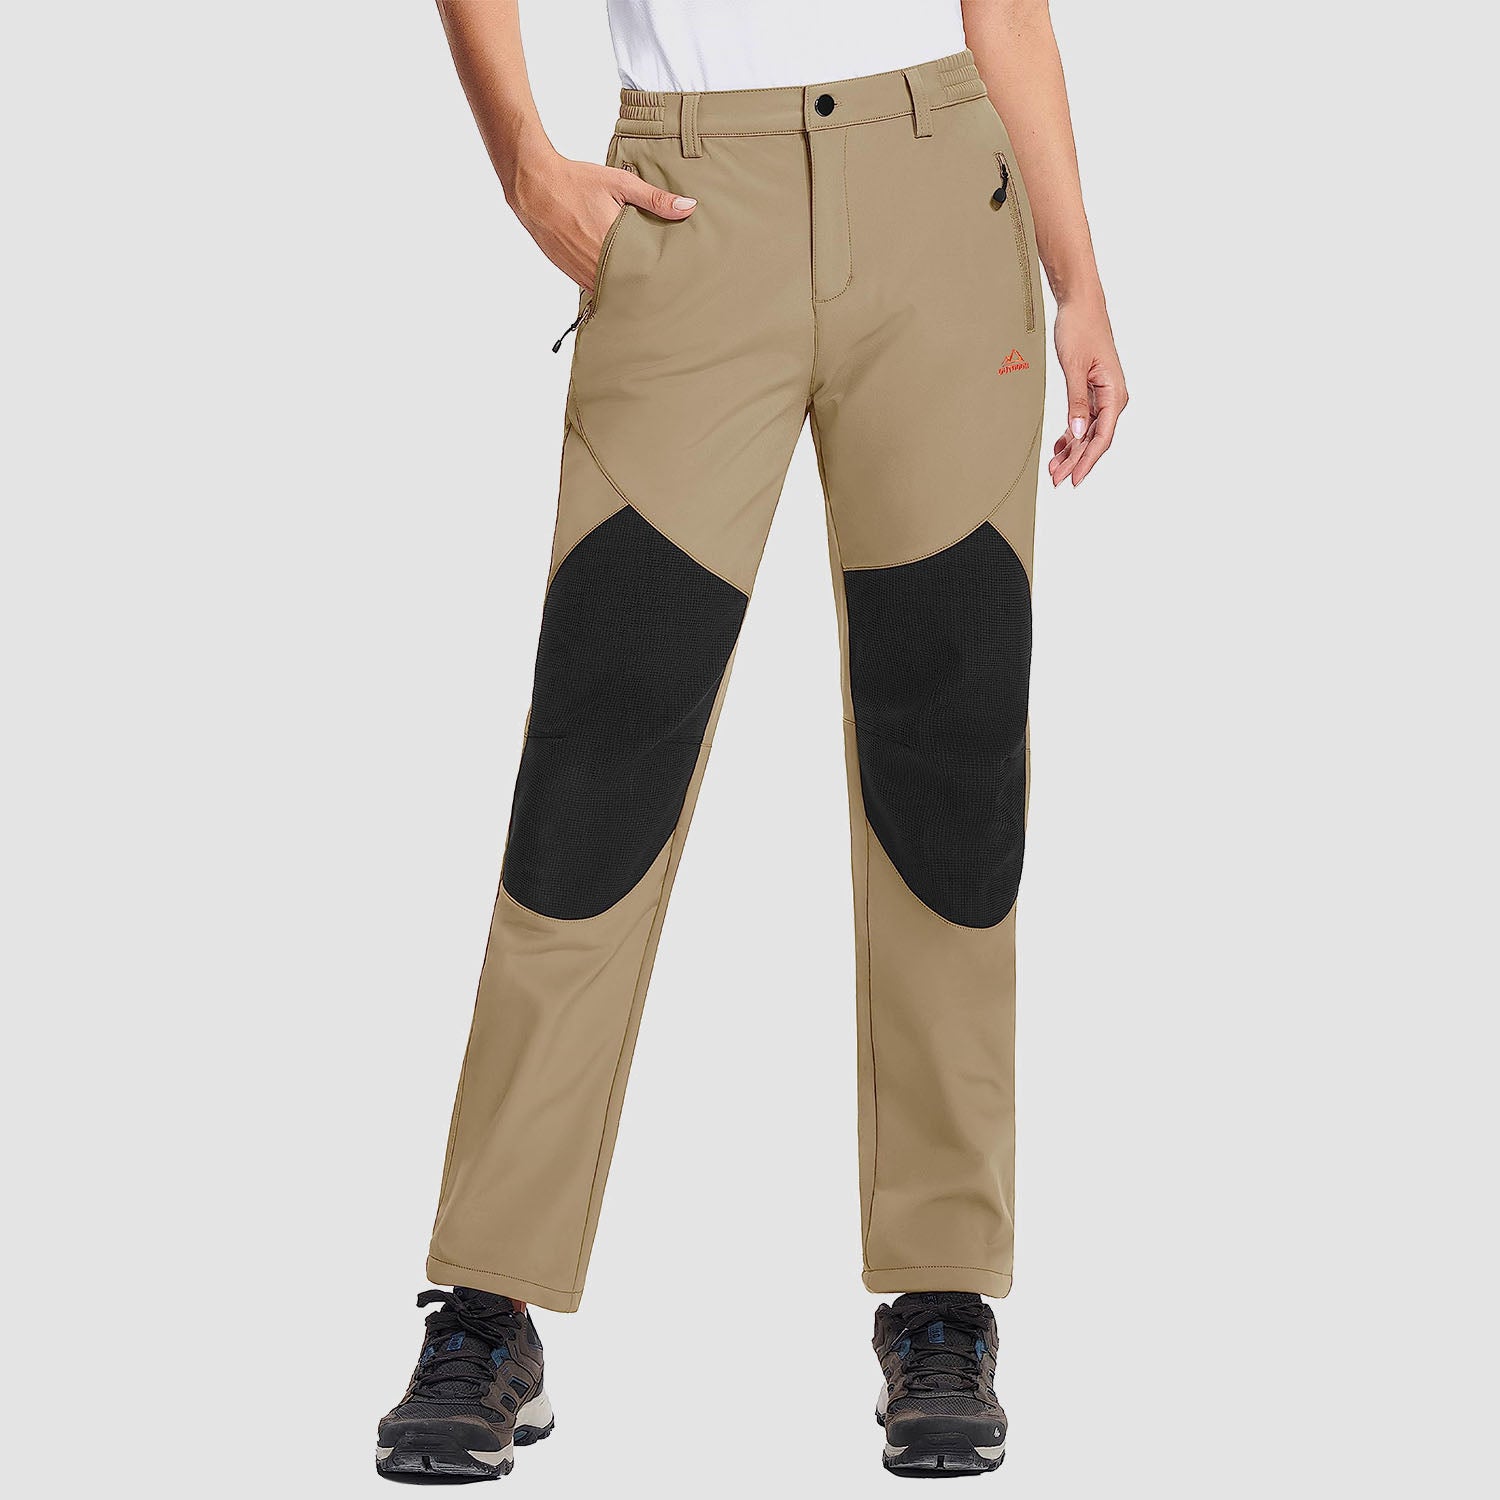 Womens Pants S MAGCOMSEN Winter Snow Ski Fleece Lined Hiking Windproof  Softshell Insulated Trousers With 5 Zipper Pockets 230919 From Kai03,  $32.29 | DHgate.Com